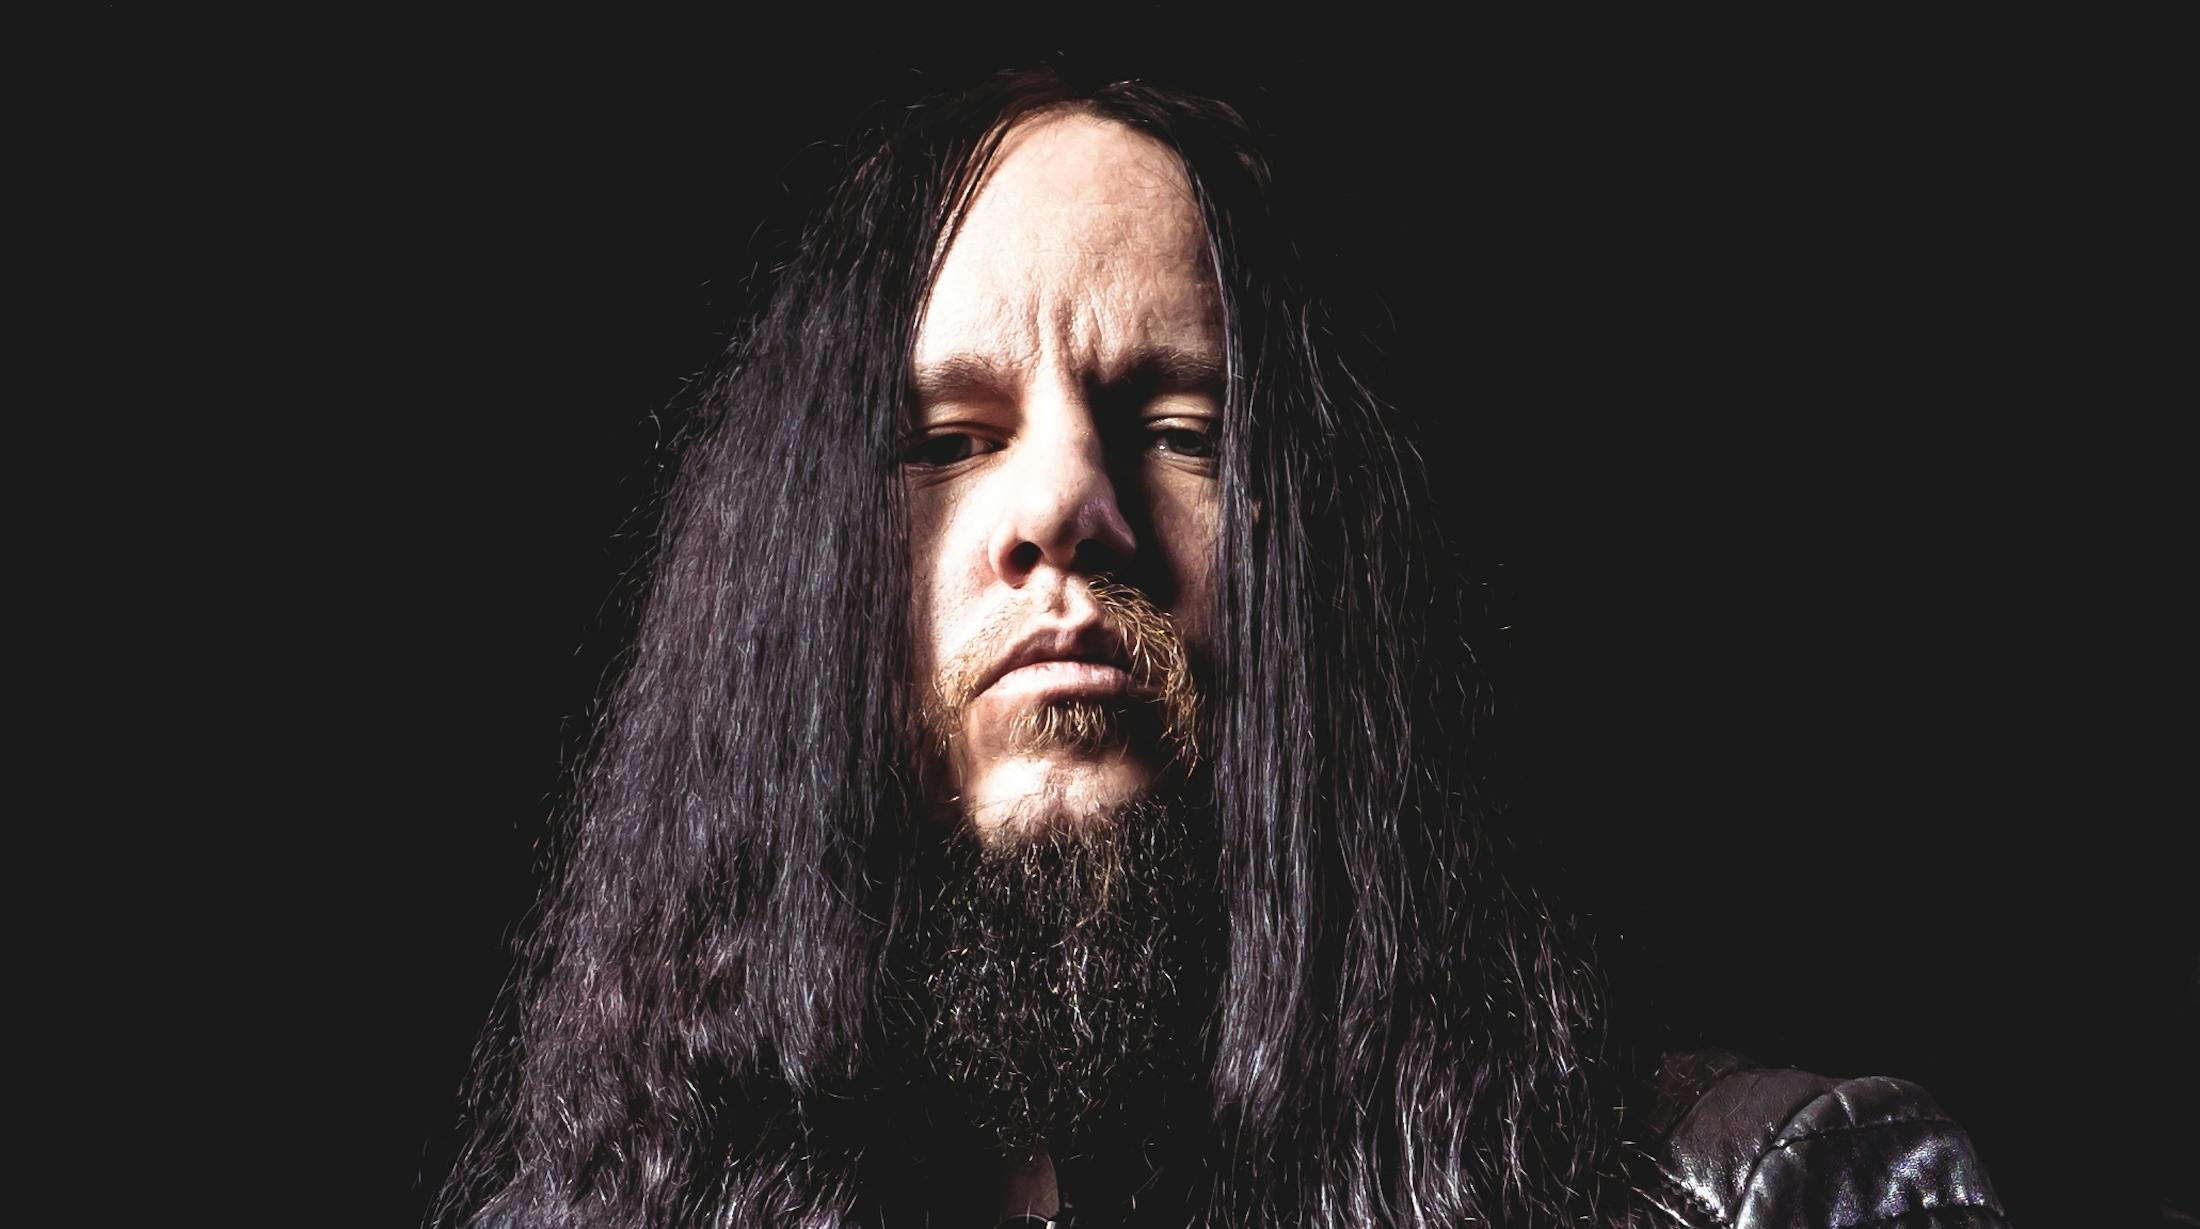 The rock world reacts to the death of Joey Jordison